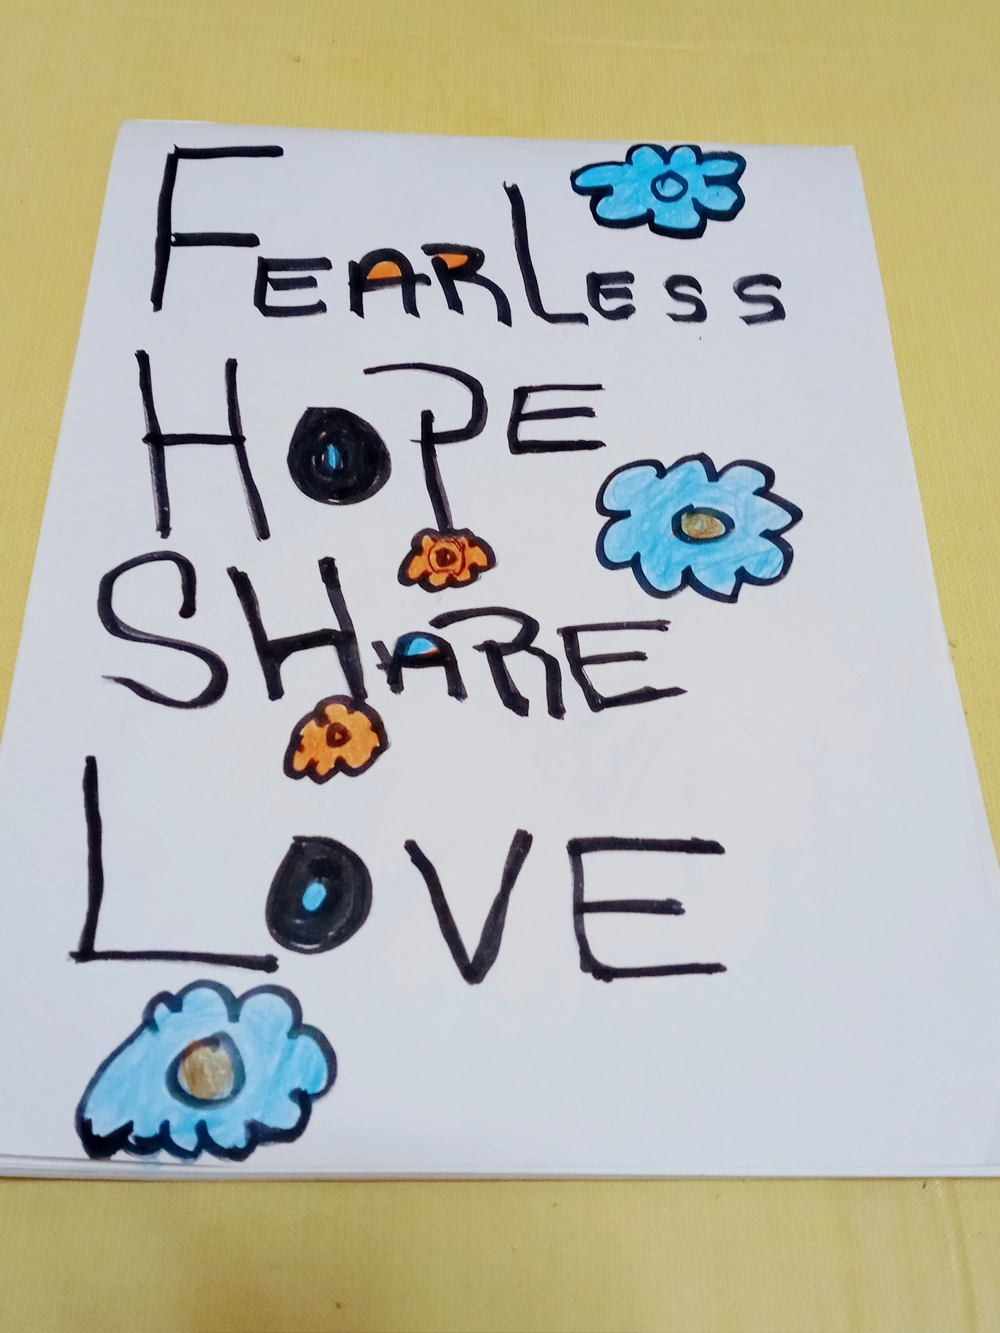 Hand-drawn sign with the words Fearless, Hope, Share, and Love surrounded by flowers